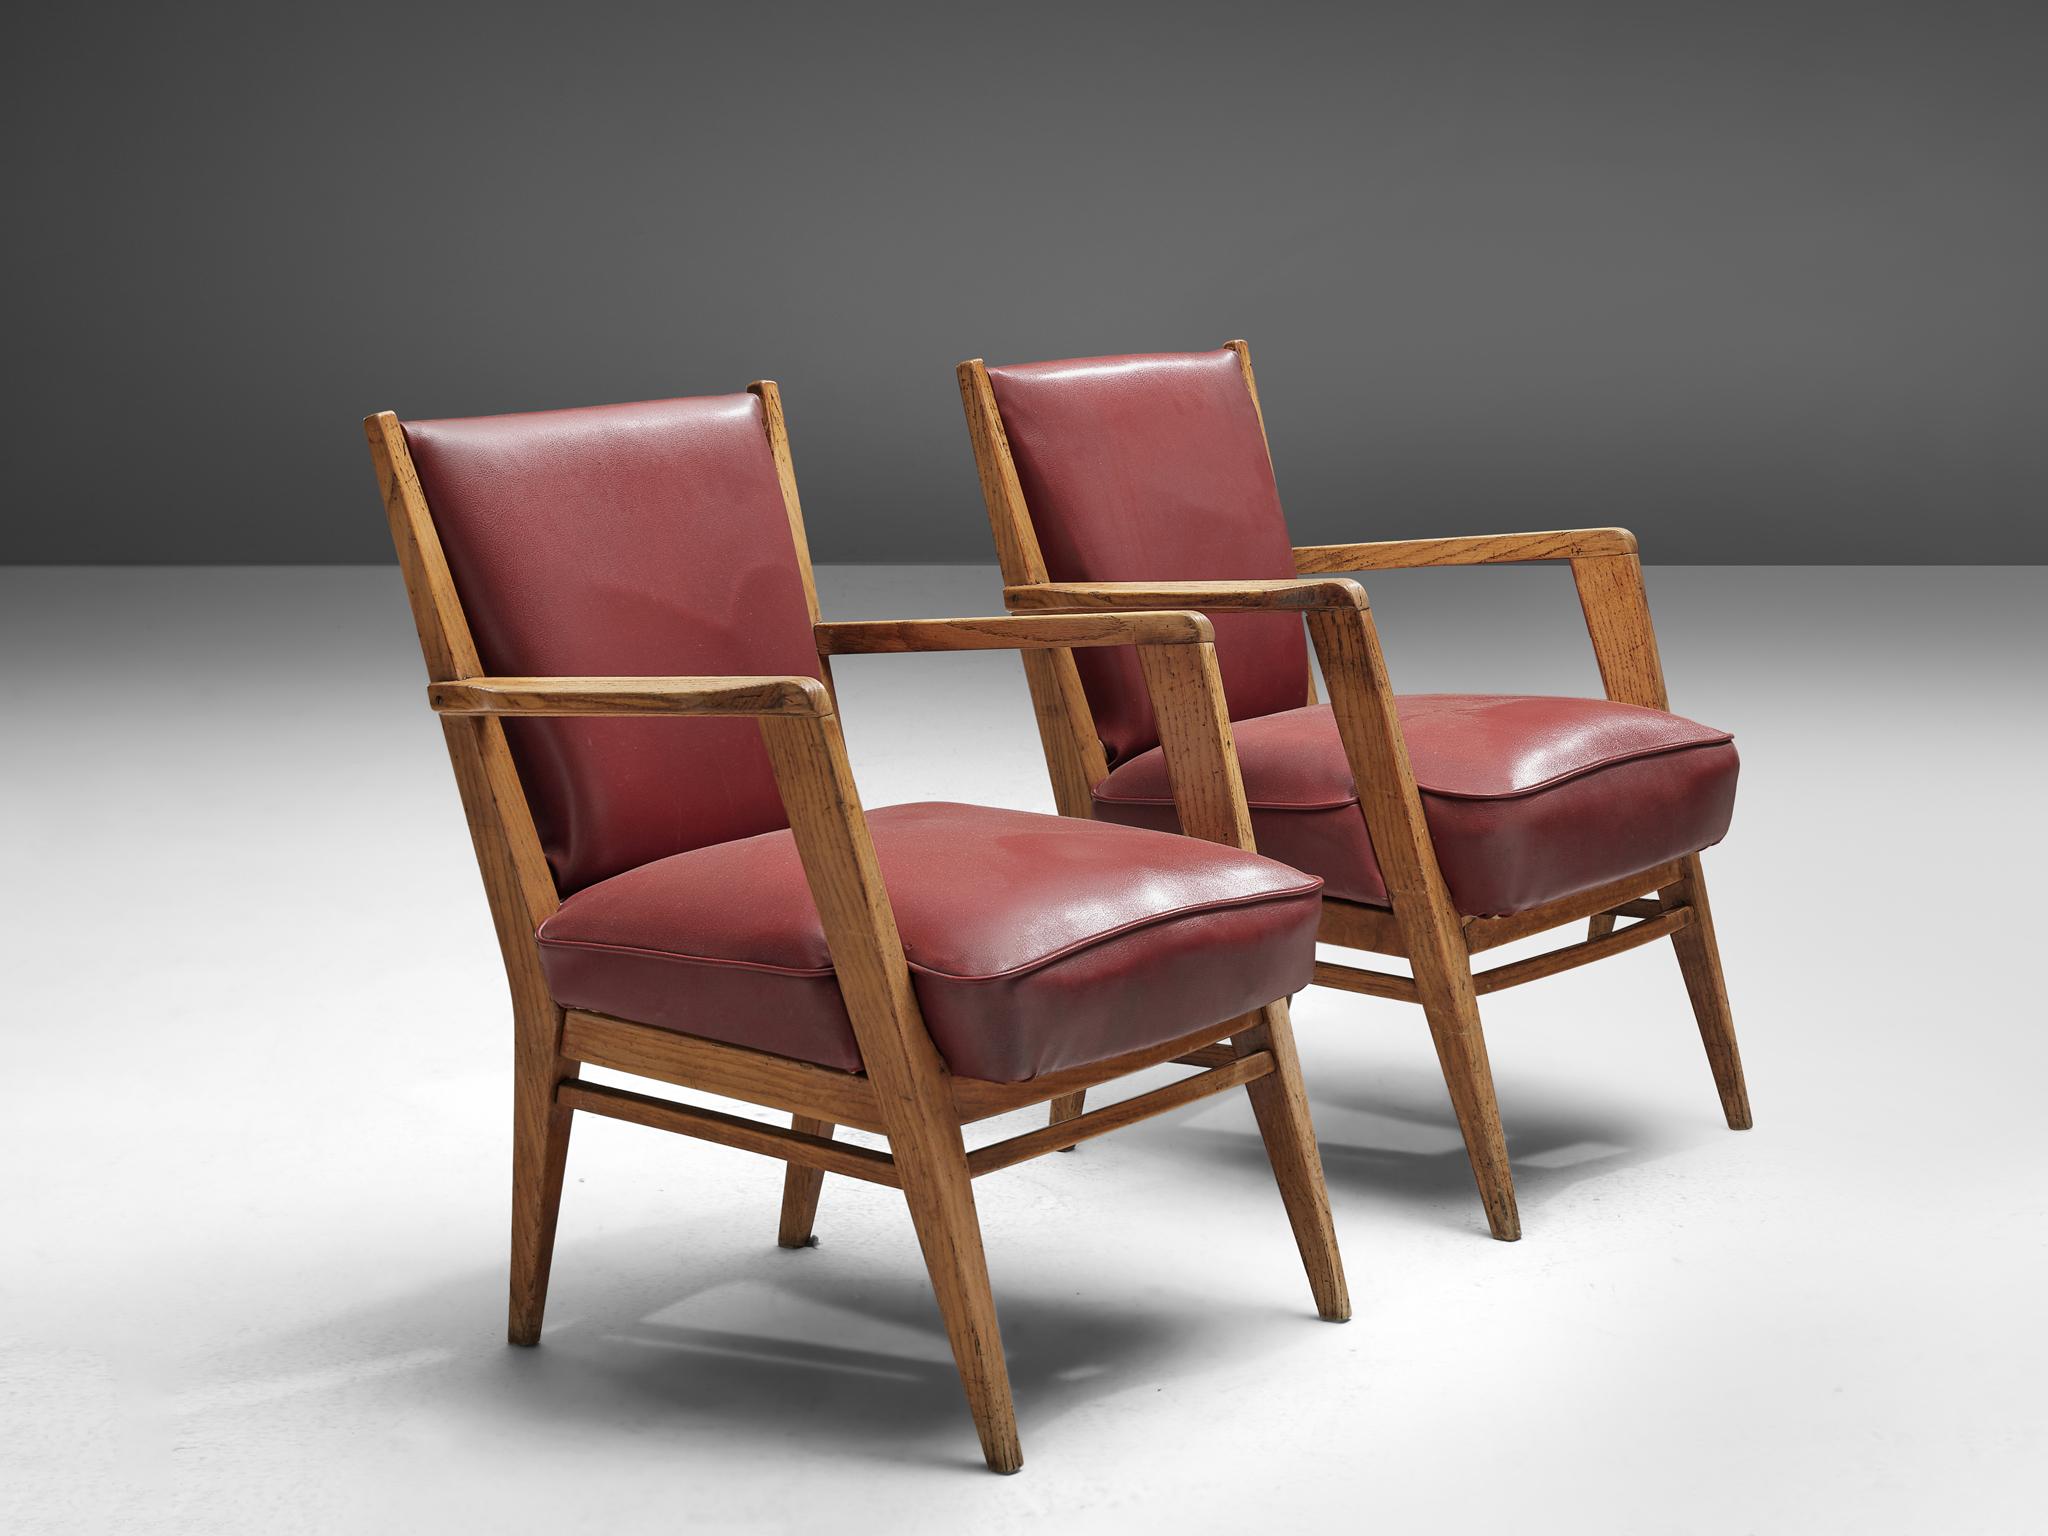 BBPR, pair of armchairs, skai leather and walnut, Italy, 1950s.

This sculptural pair of lounge chairs are clearly a design by the architects of BBPR. The model with a wide seat has the characteristic, sculptural frame. The tapered and titled legs